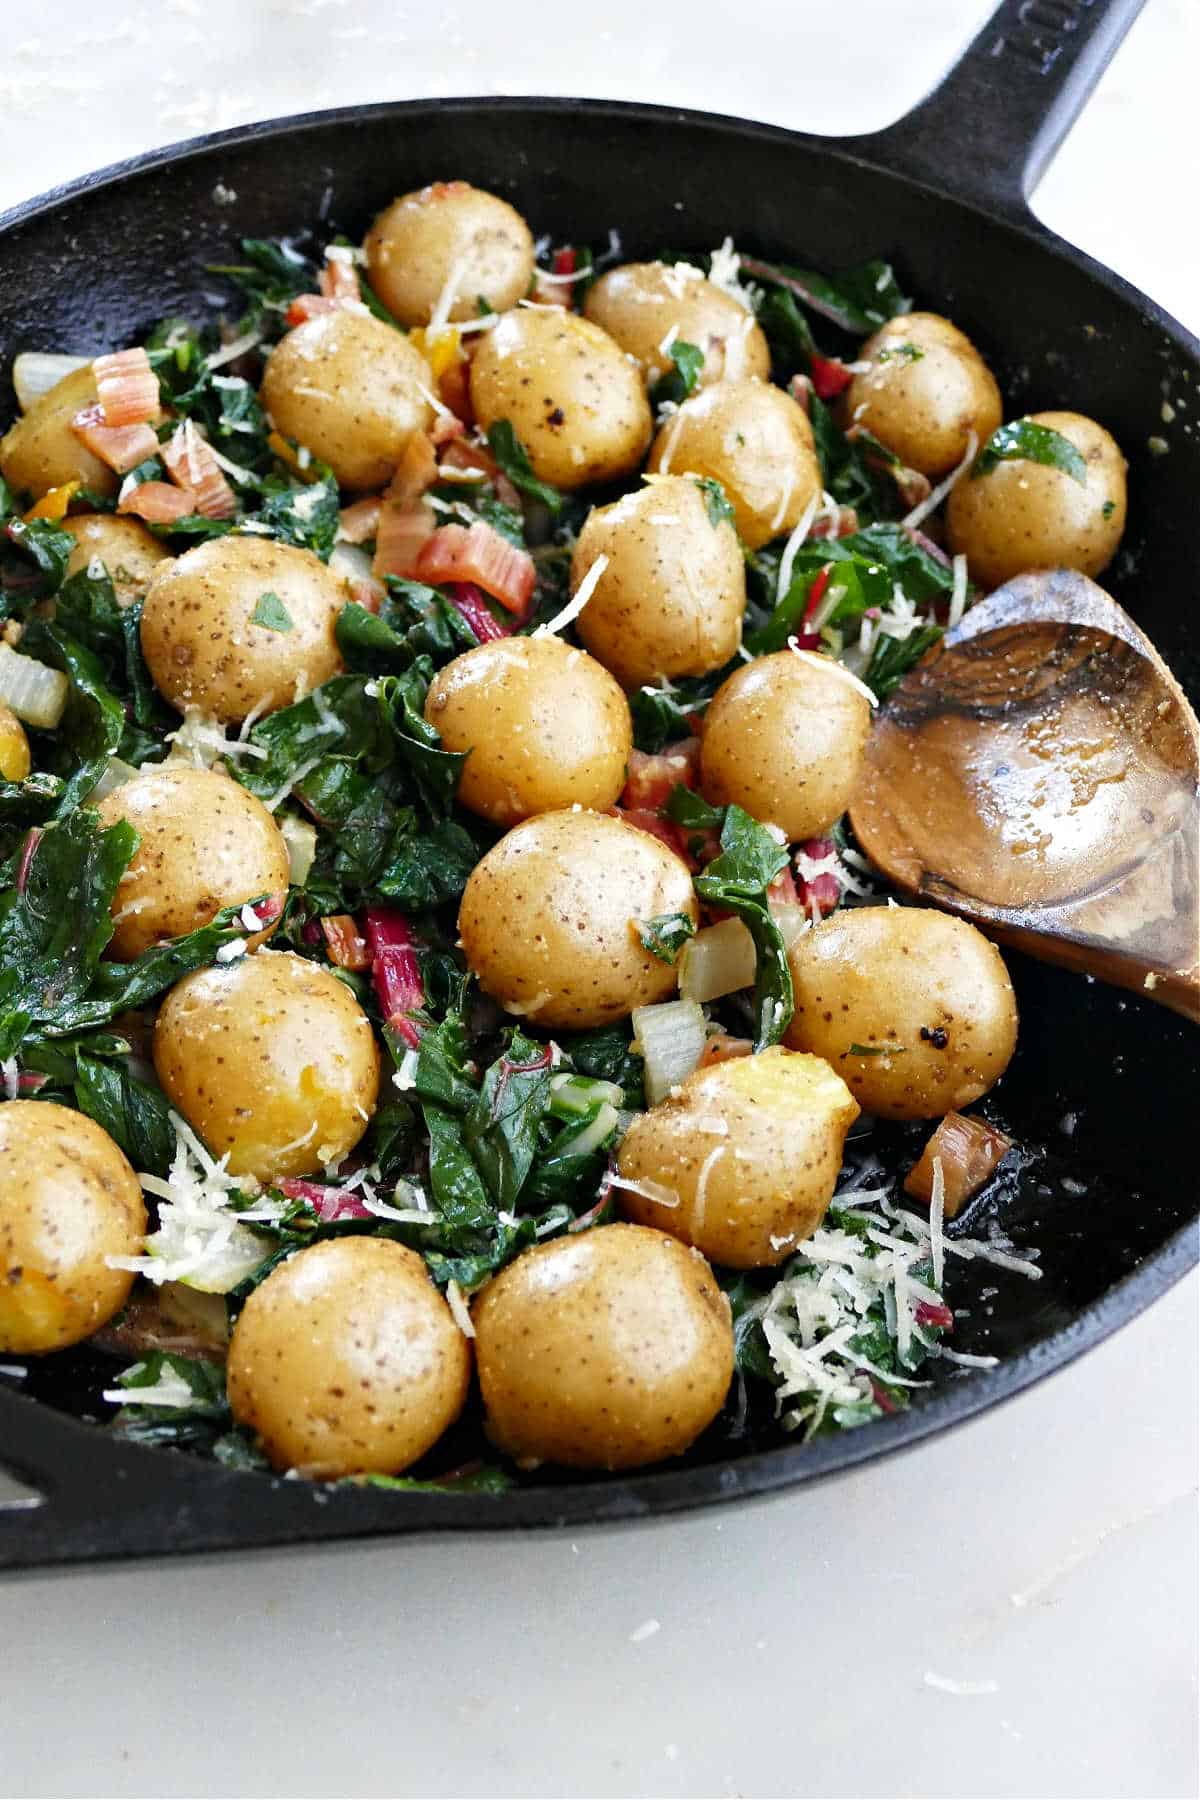 potatoes and Swiss chard leaves and stems in a cast iron skillet